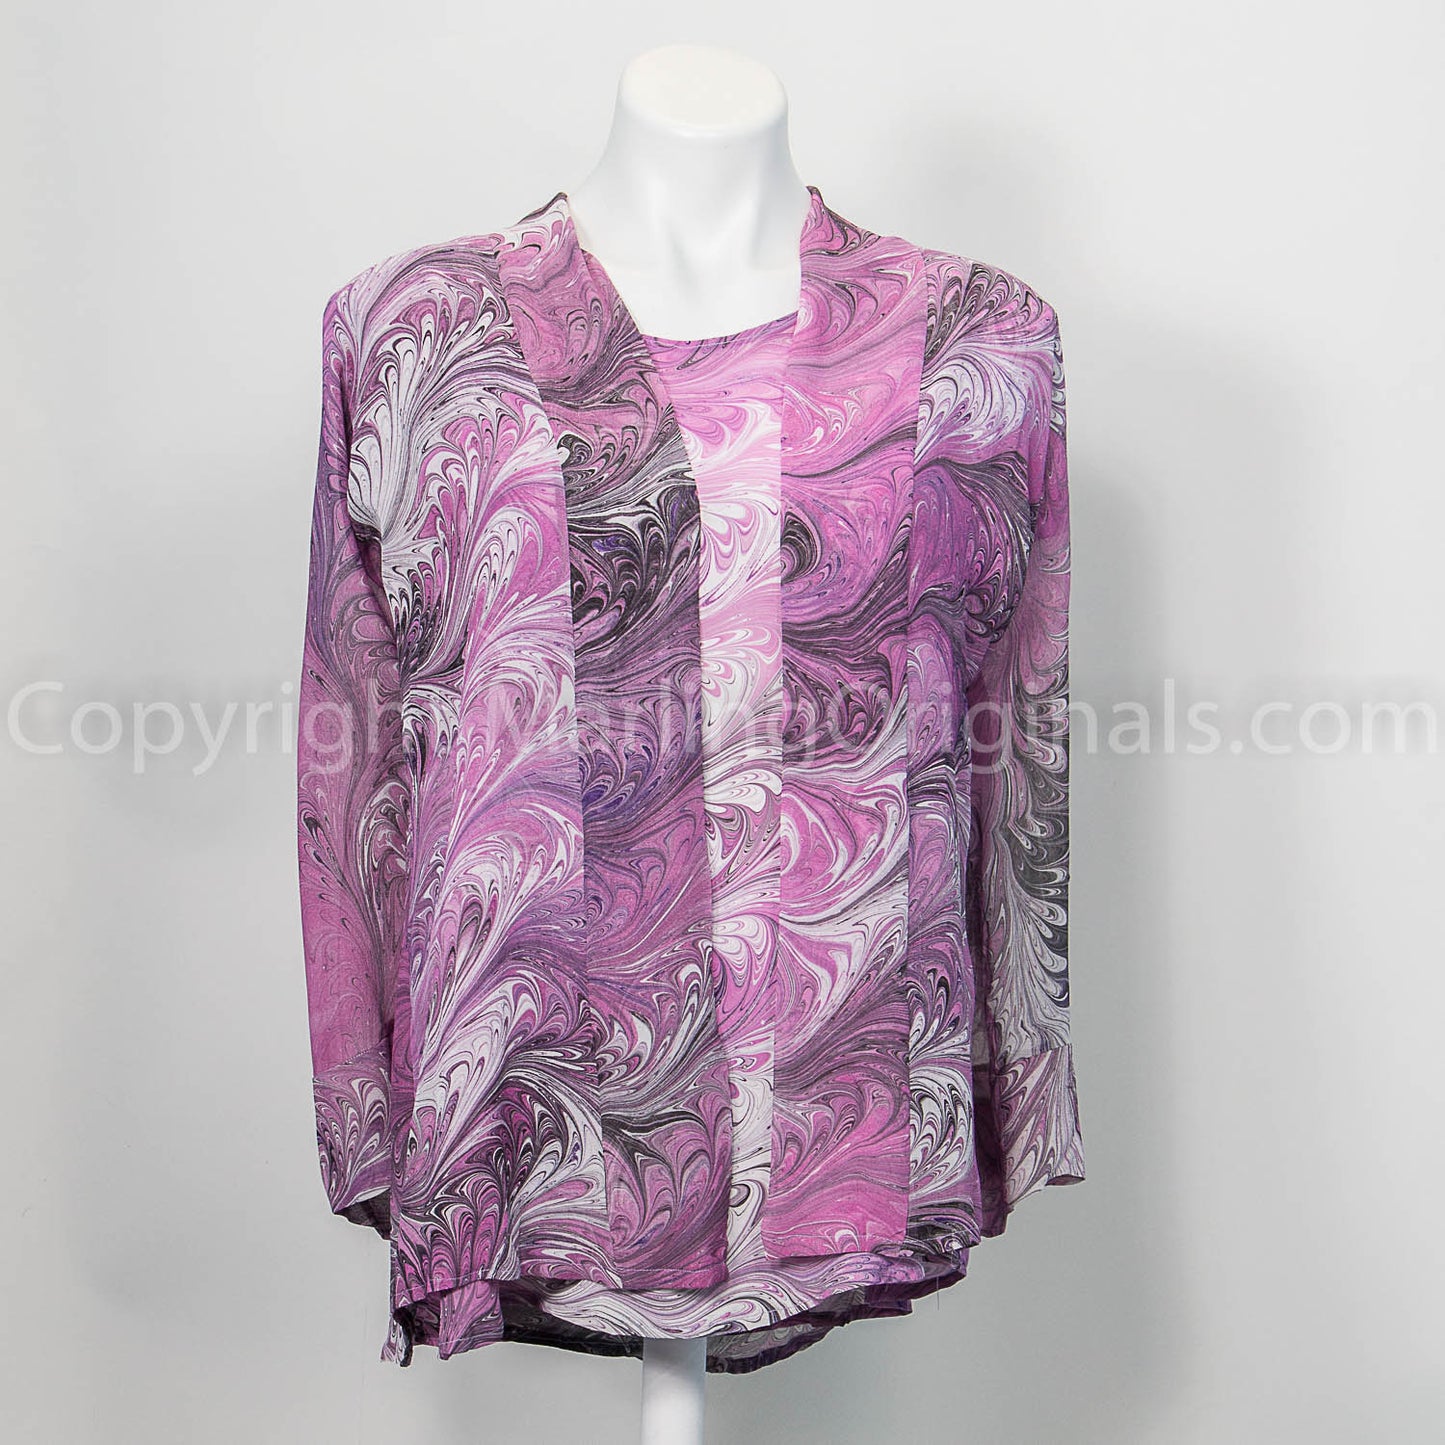 hand painted silk jacket with matching short sleeve silk top in pink, black and white